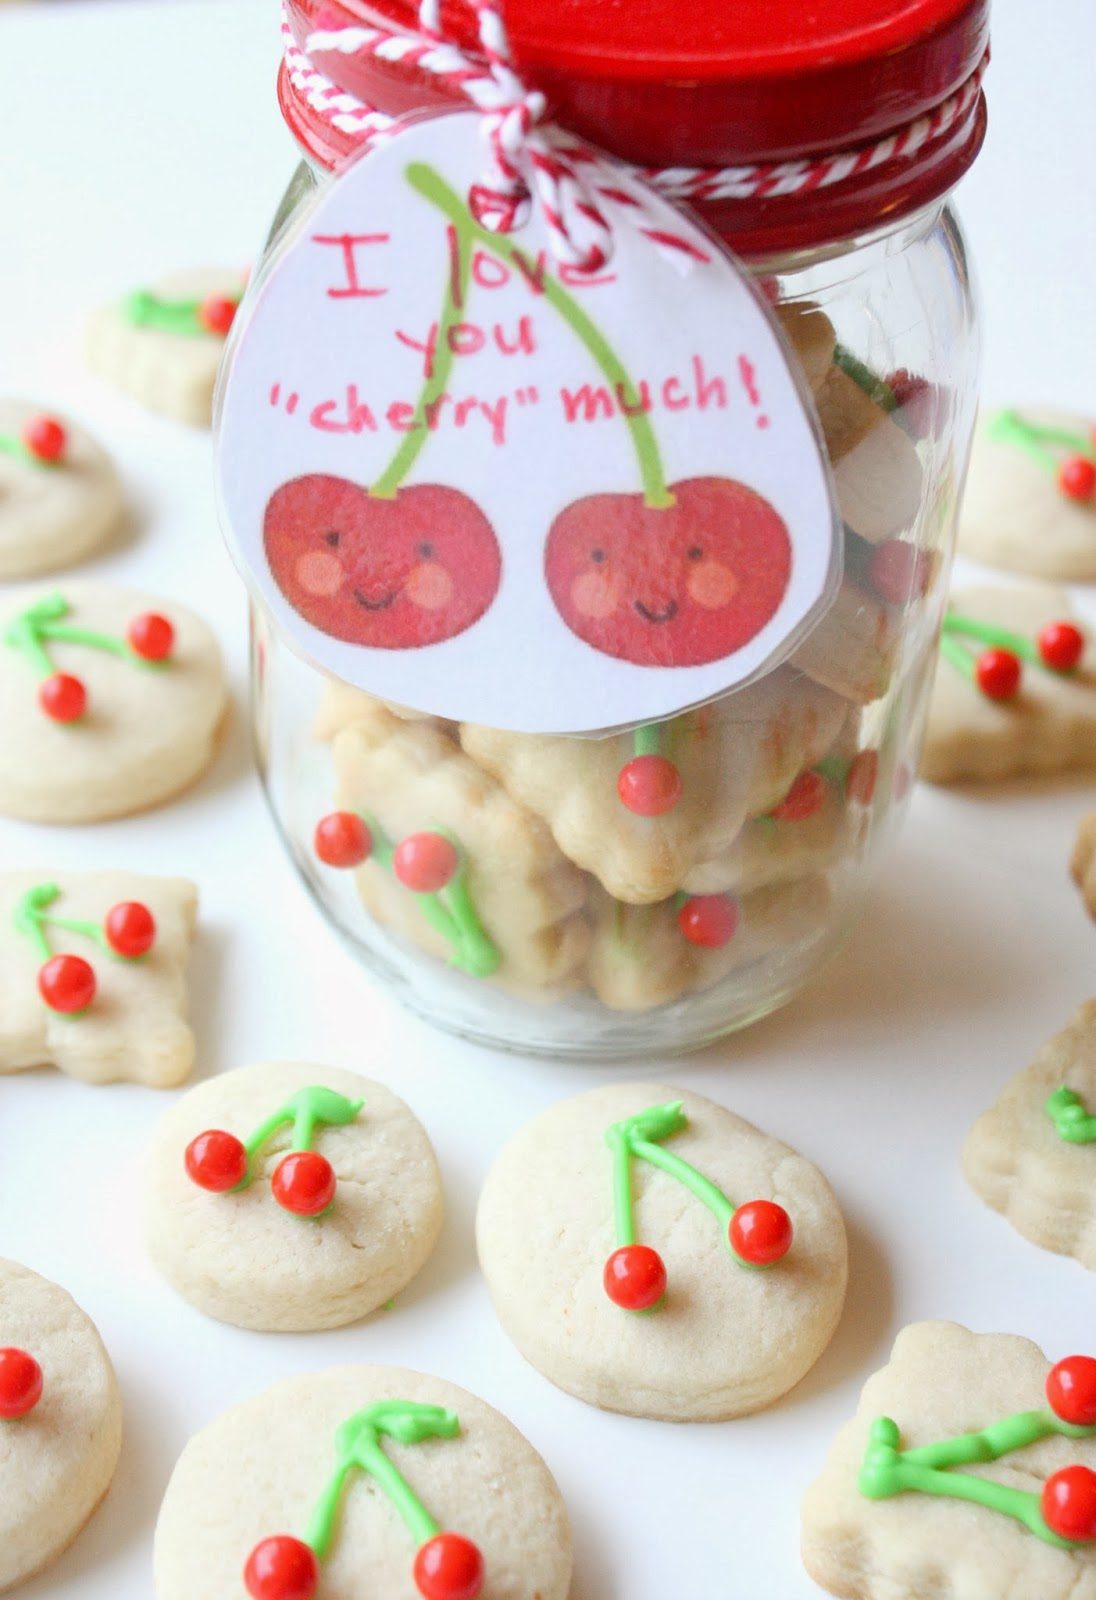 I Love You &#8220;Cherry&#8221; Much~Valentine Cookies, Lay The Table